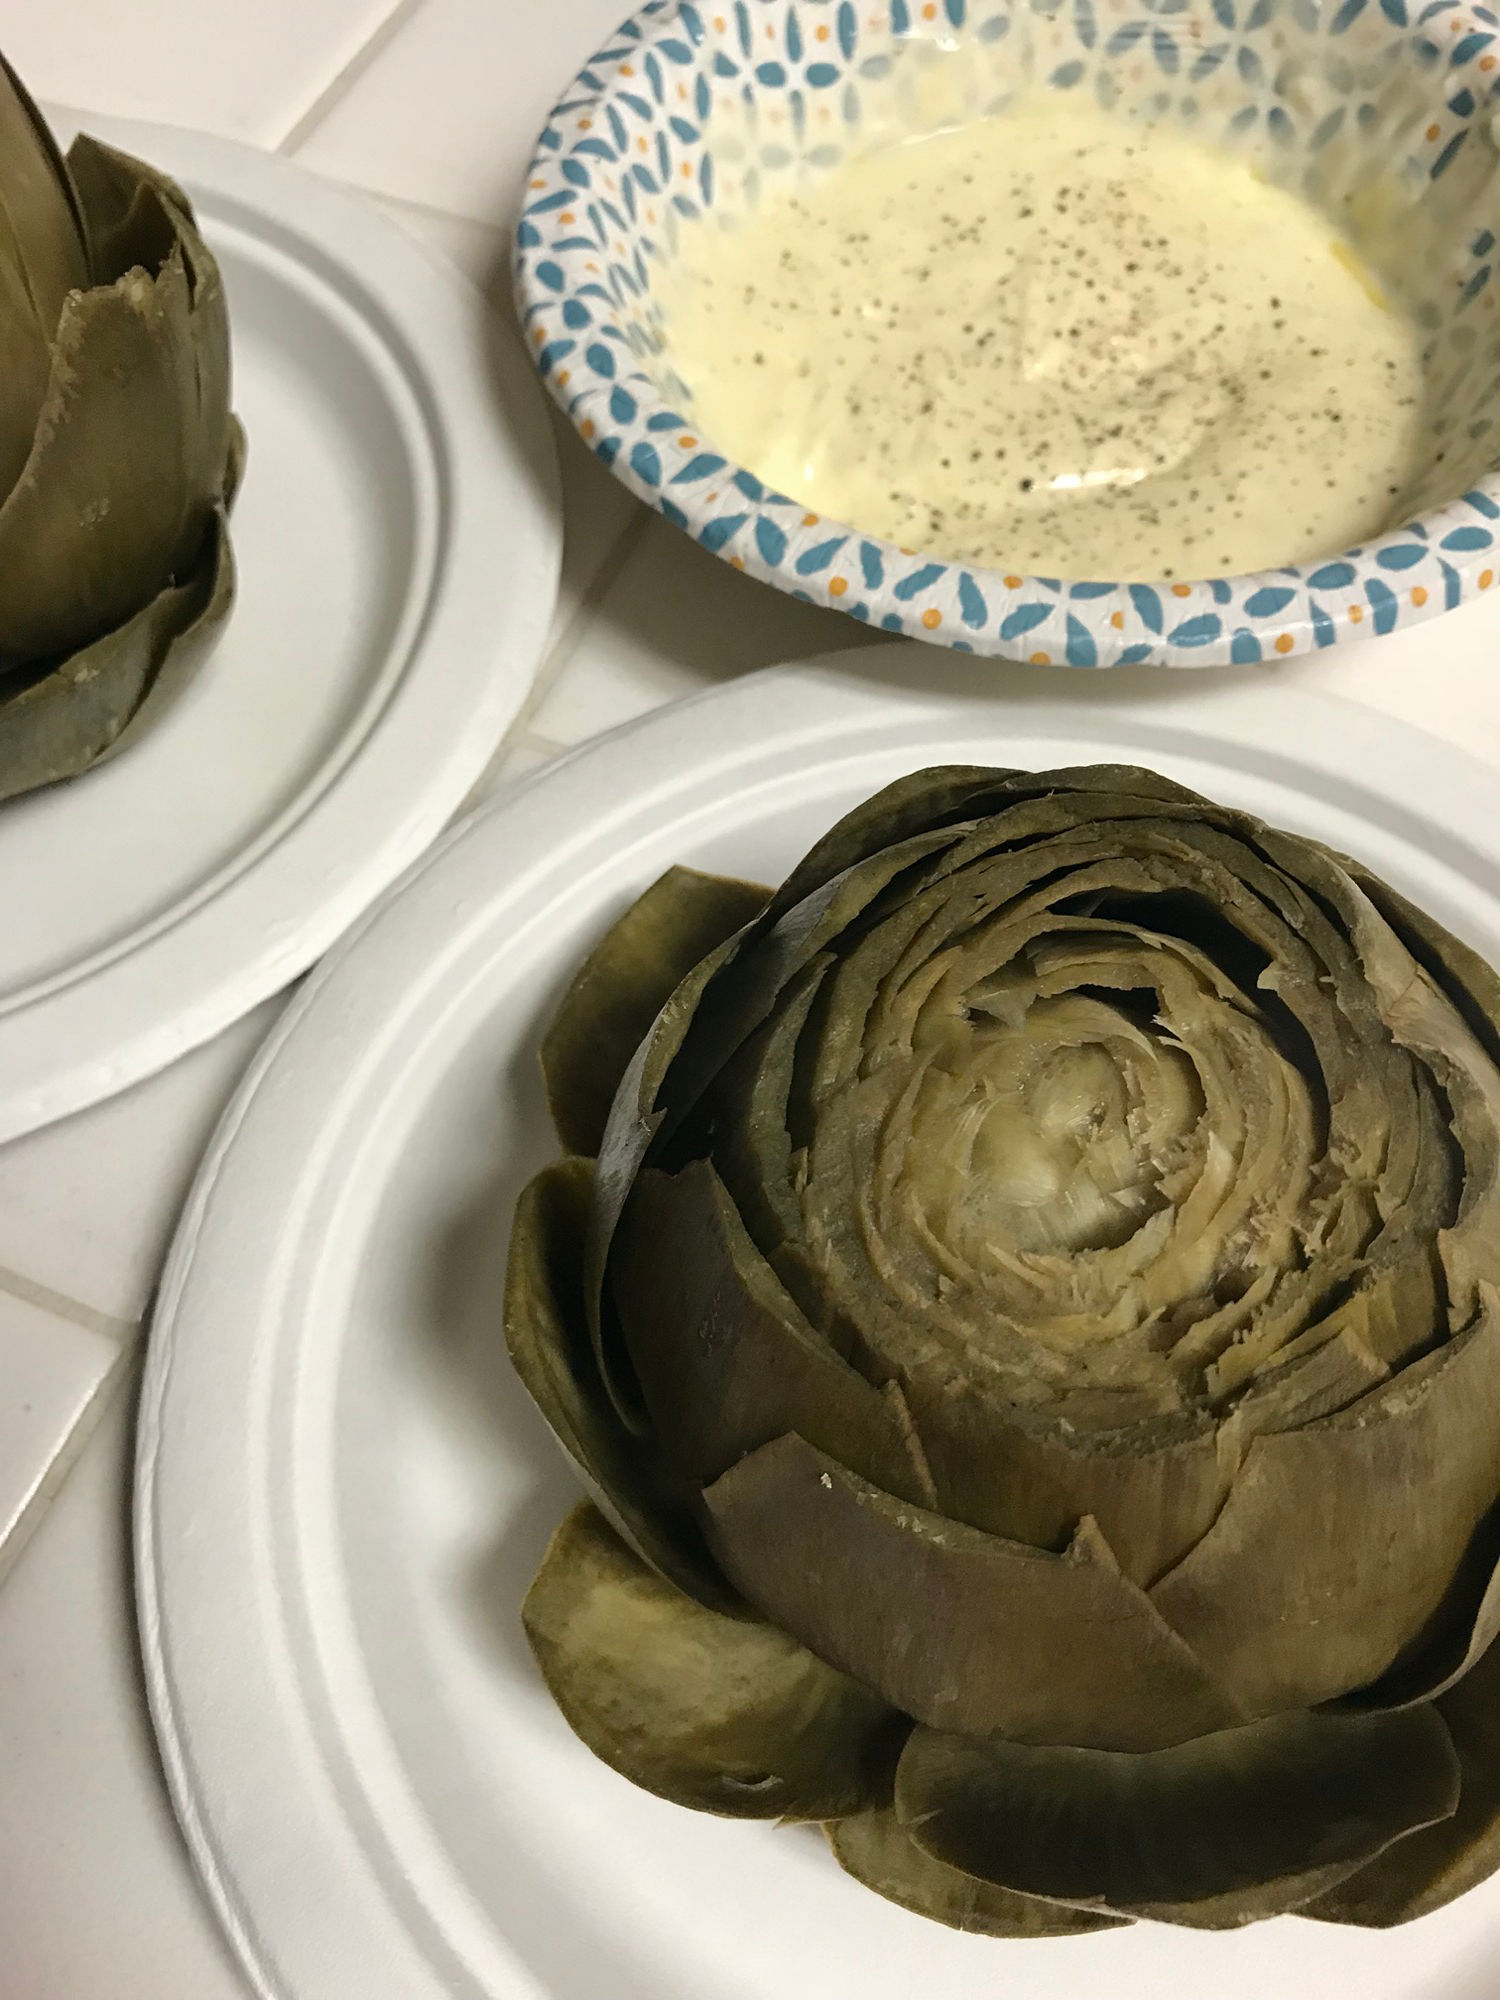 Artichokes With Dipping Sauce